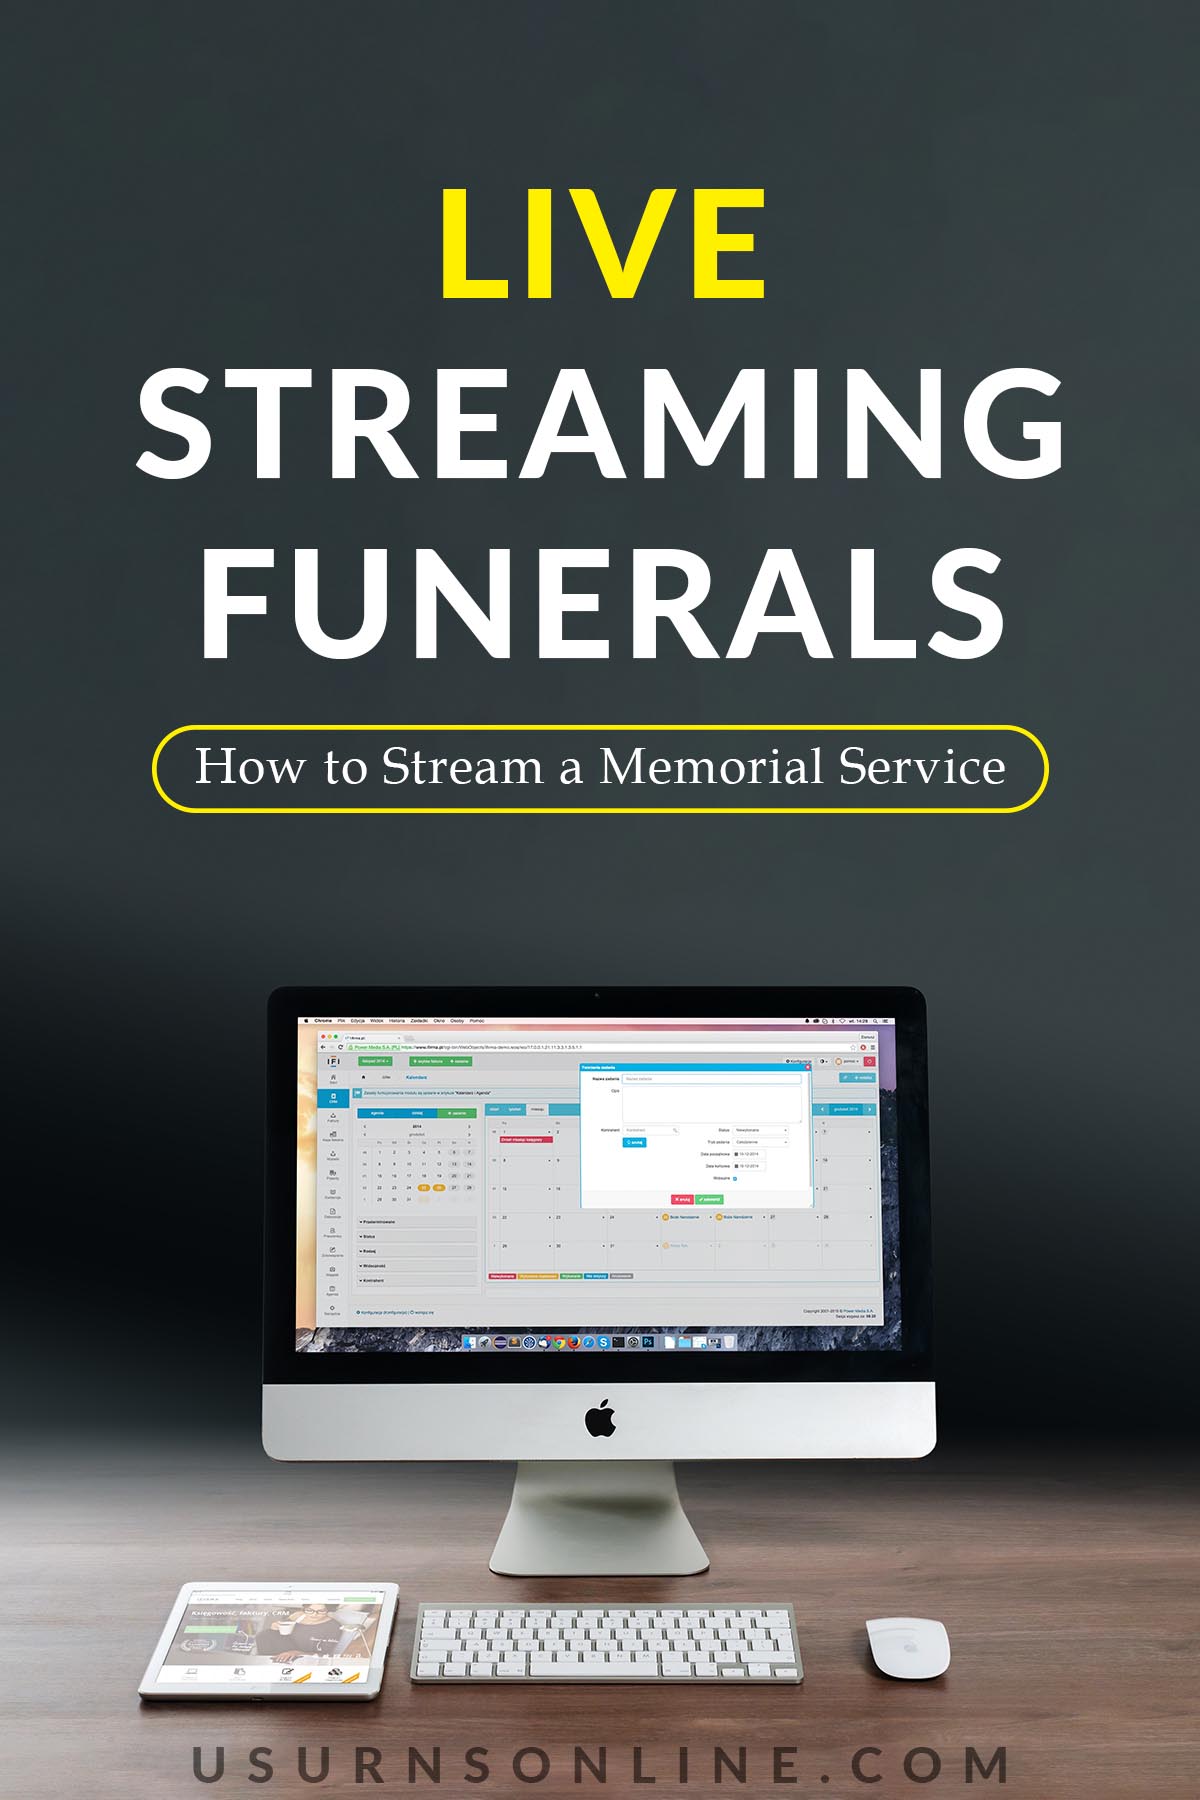 how to live stream funerals - feature image